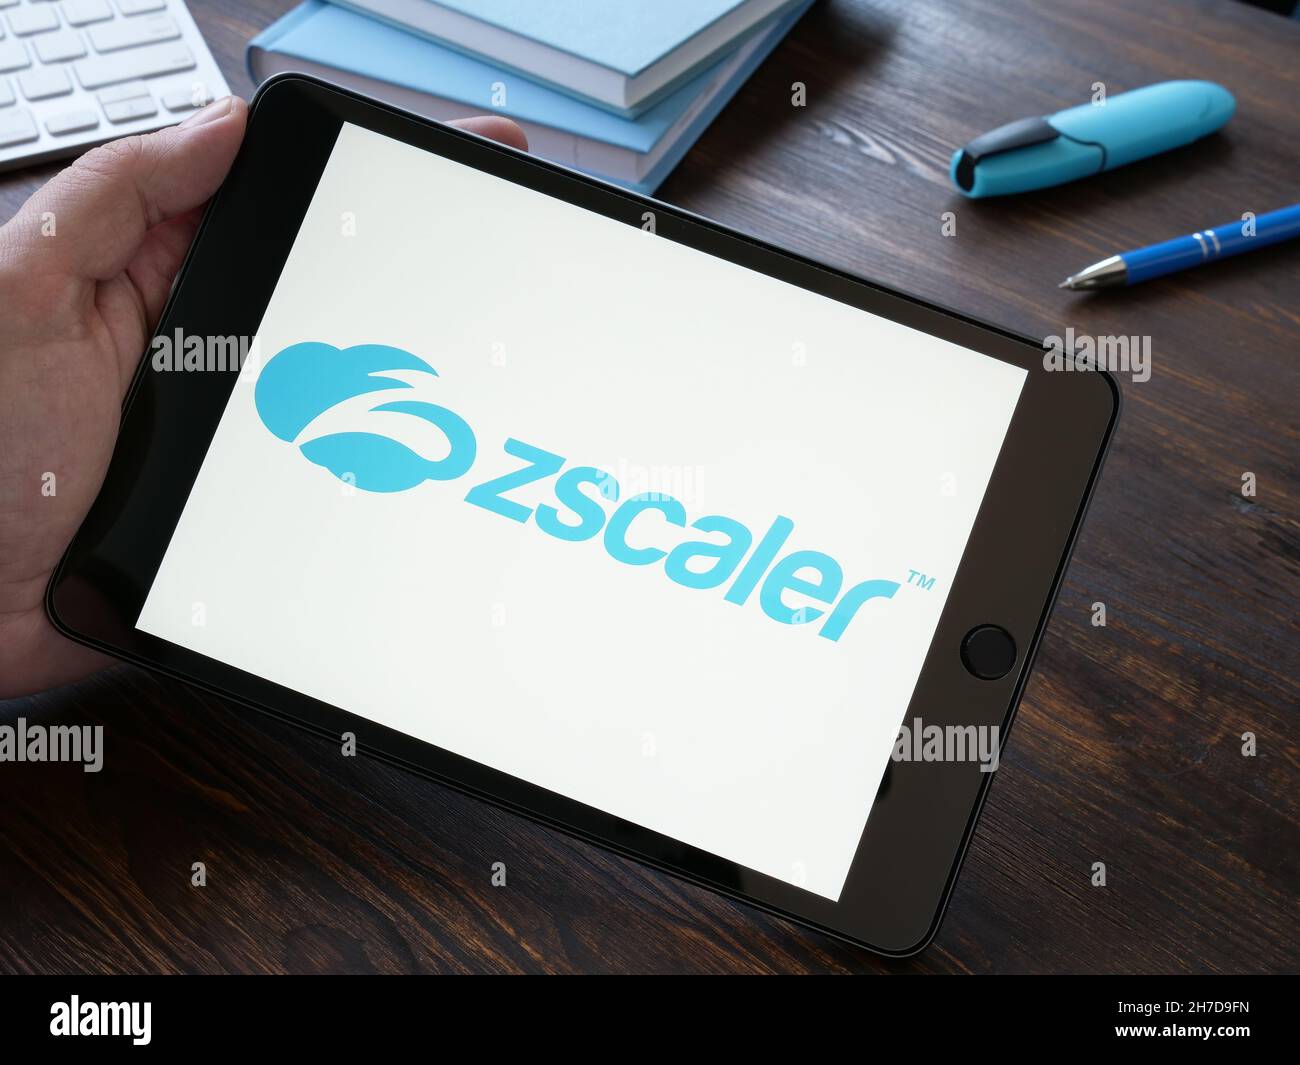 KYIV, UKRAINE - October 20, 2021. Tablet with Zscaler company logo on the screen. Stock Photo